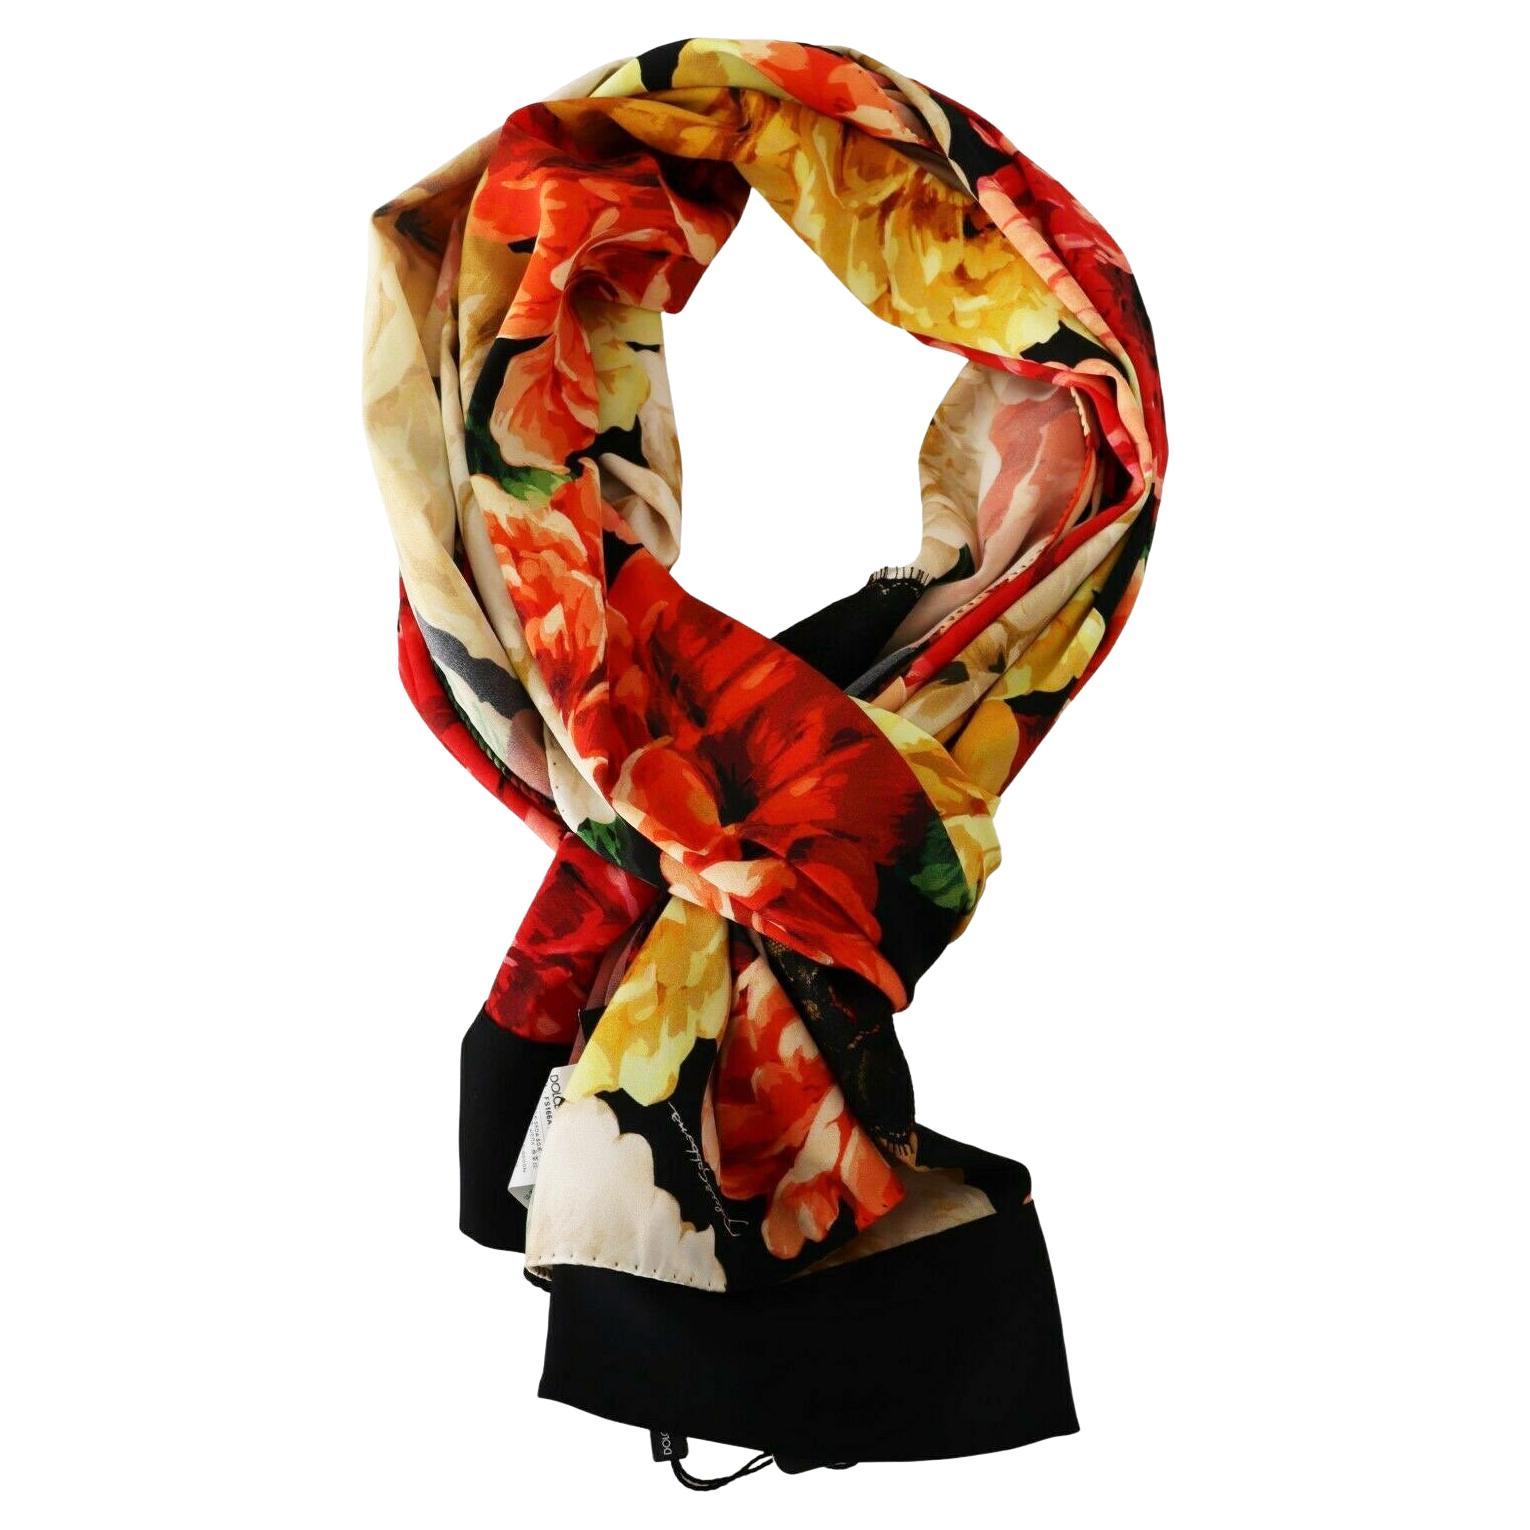 Soft Rose Red Lily Scarf Ladies Cotton Blend Lilies Scarves Flower Tassels Wrap 